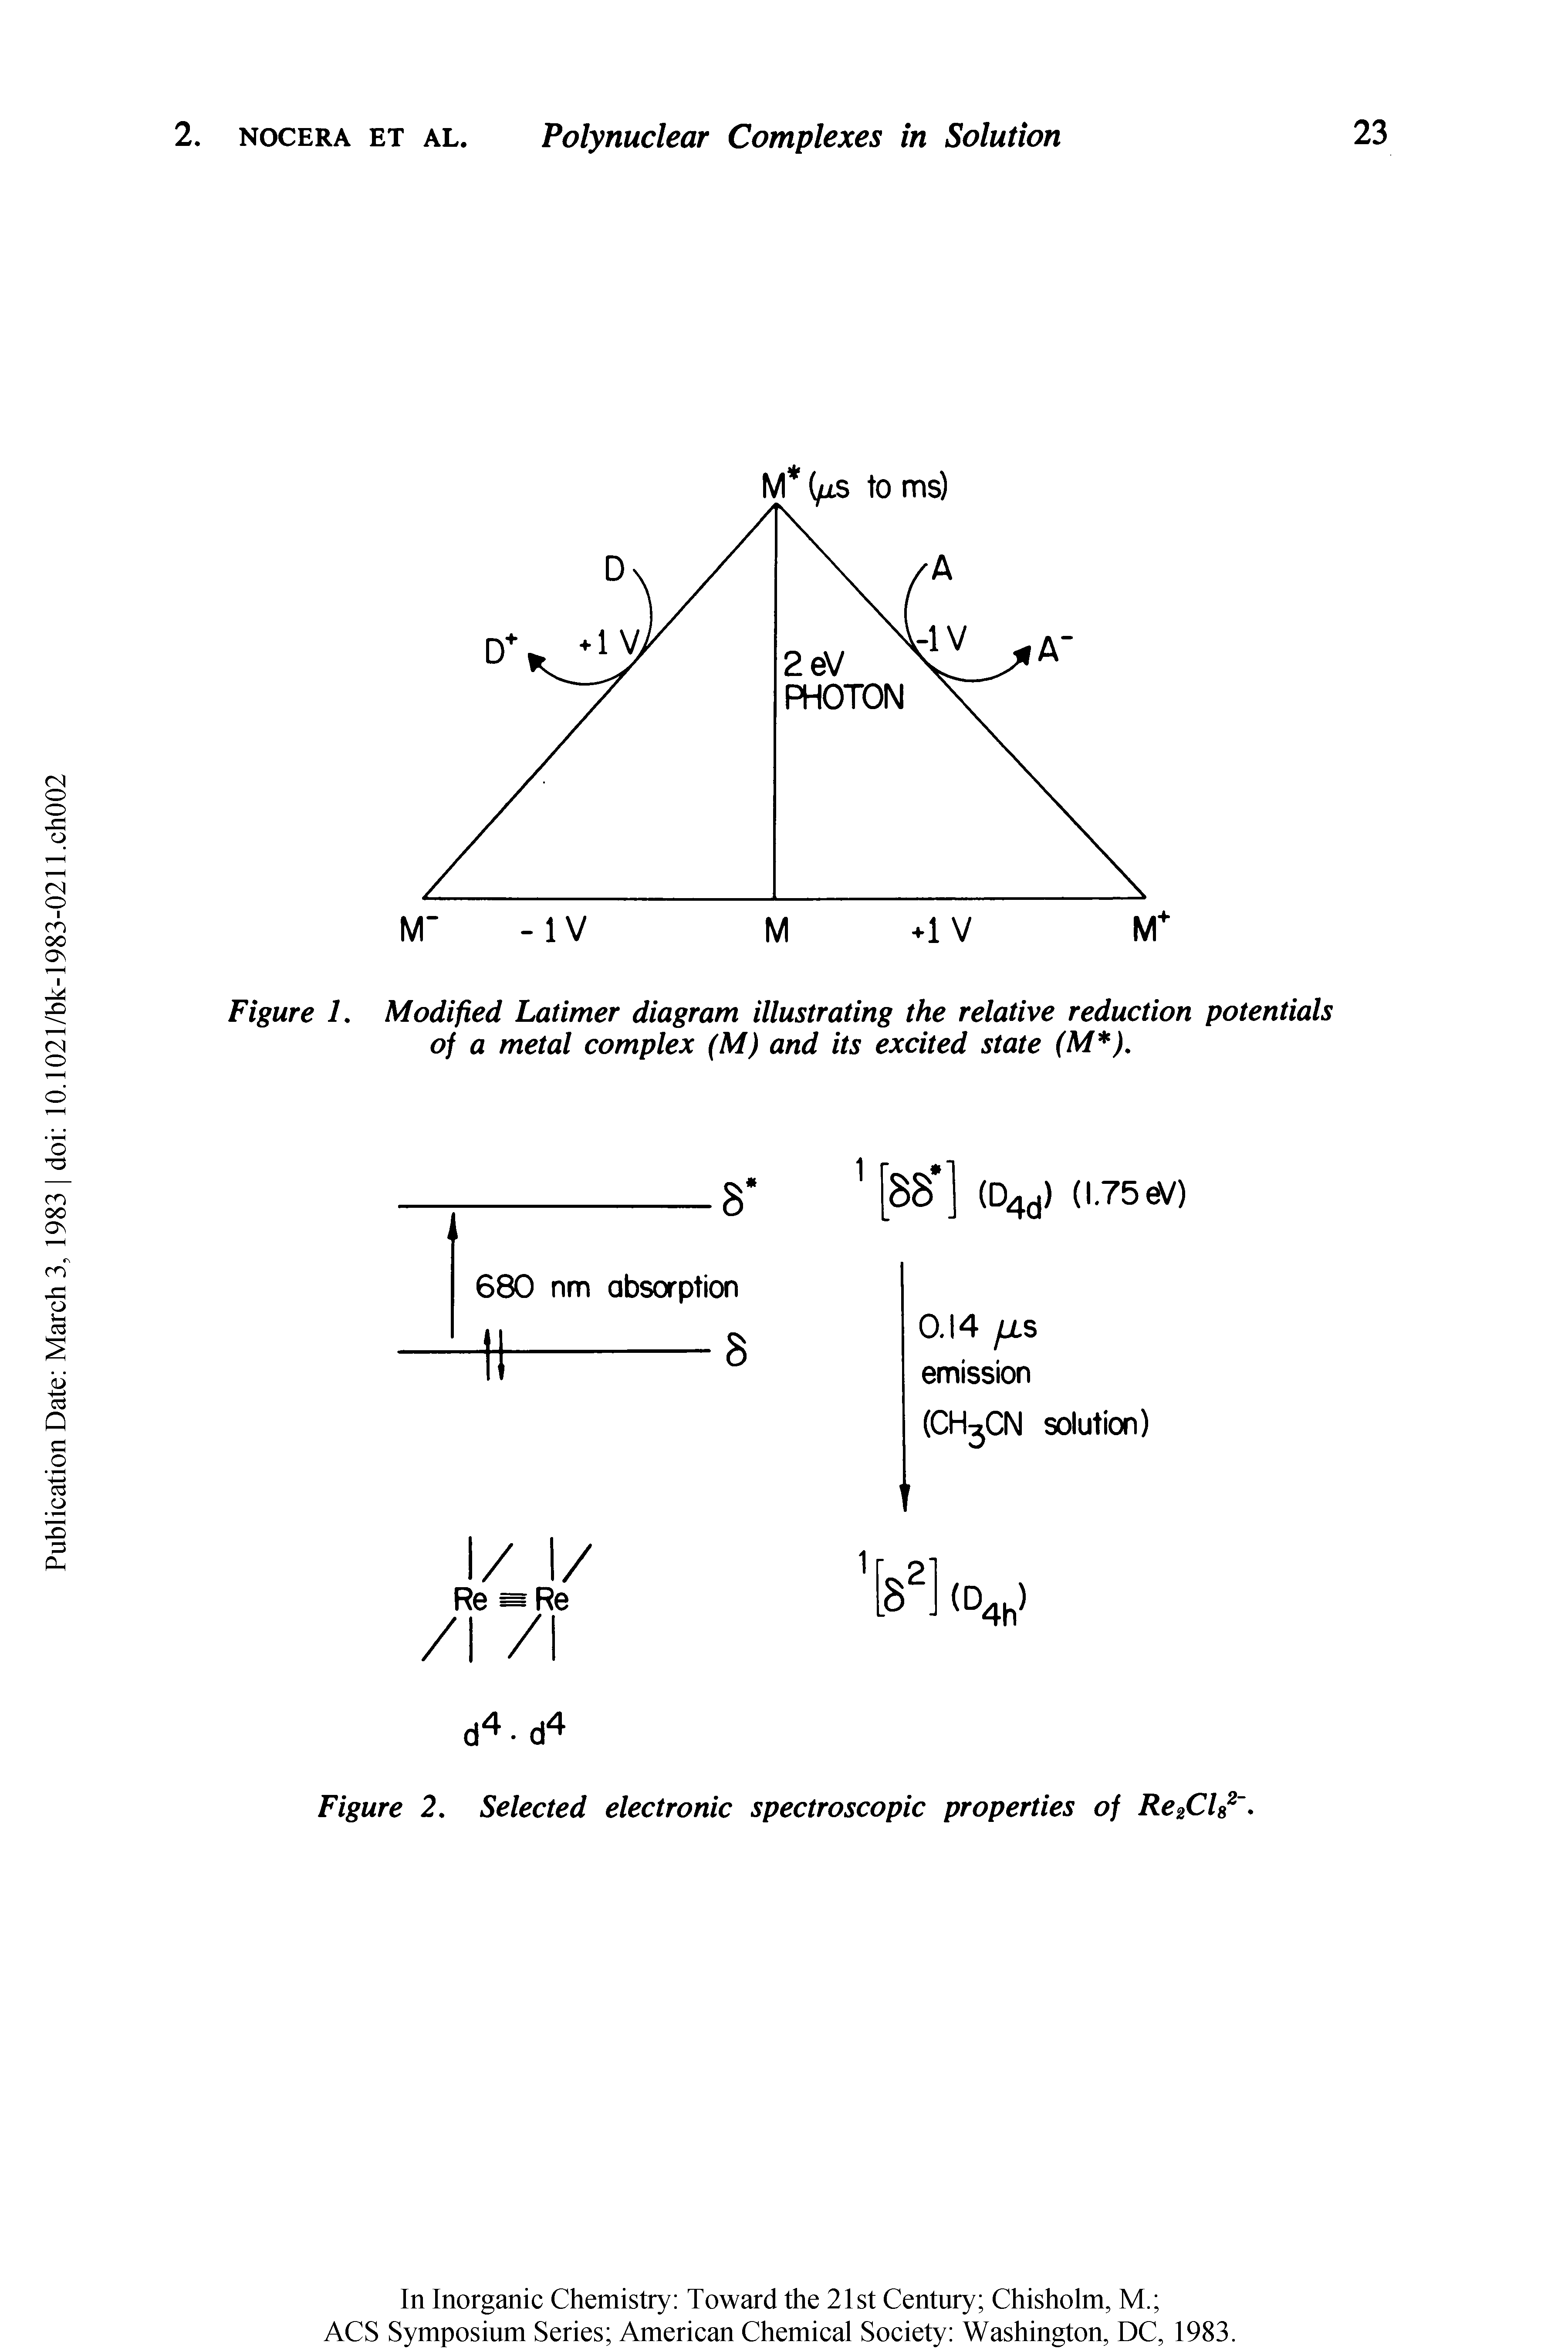 Figure L Modified Latimer diagram illustrating the relative reduction potentials of a metal complex (M) and its excited state (M ).